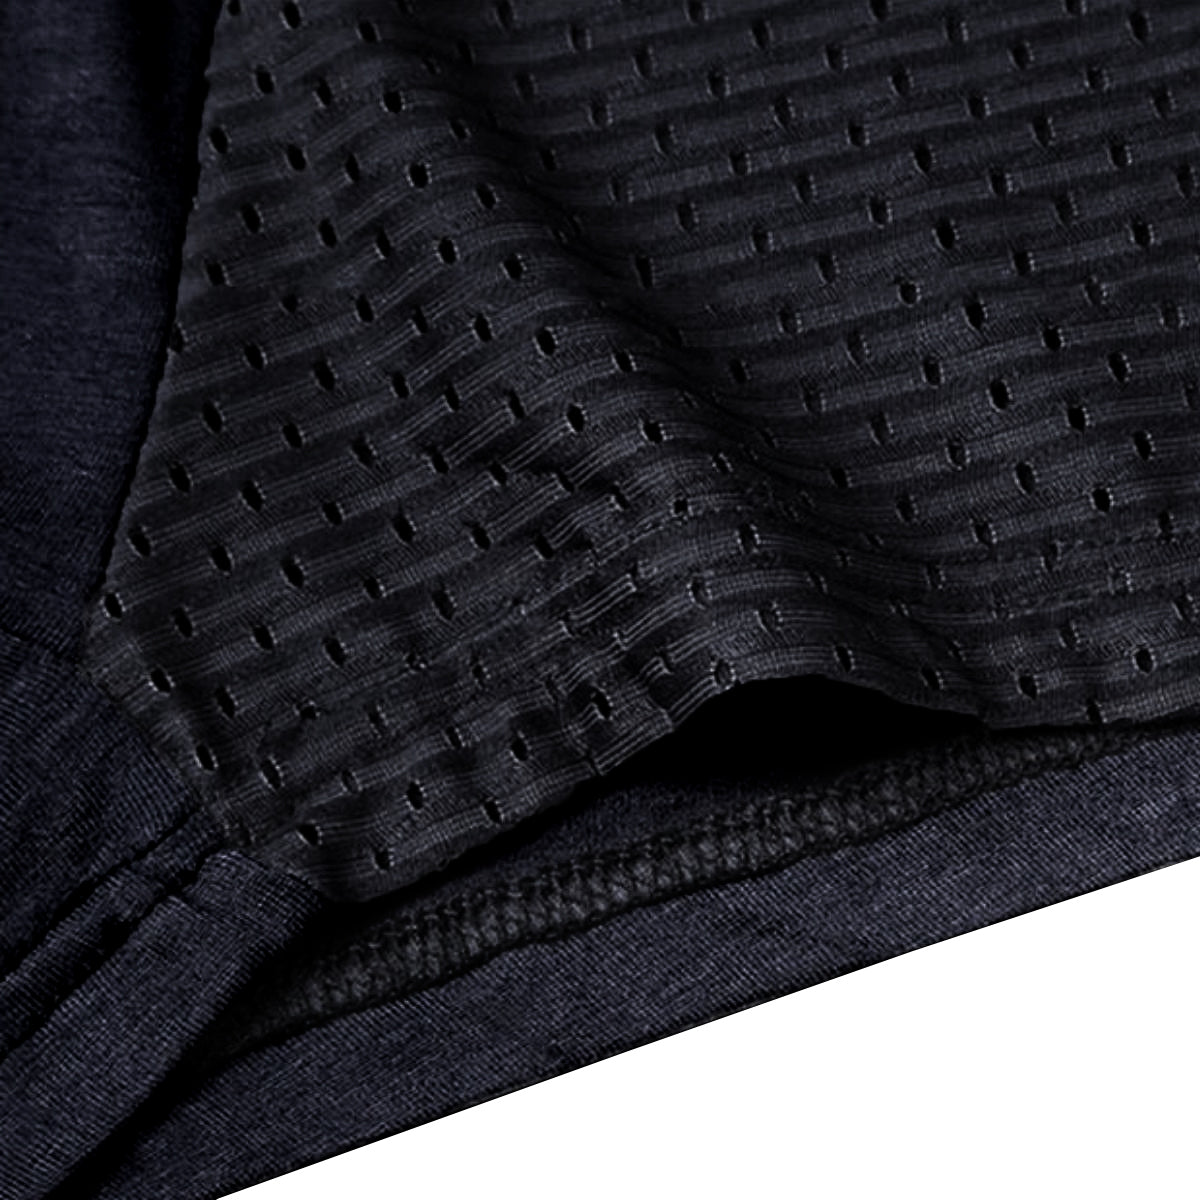 BOXR | Bamboo Boxers 2-Pack Black